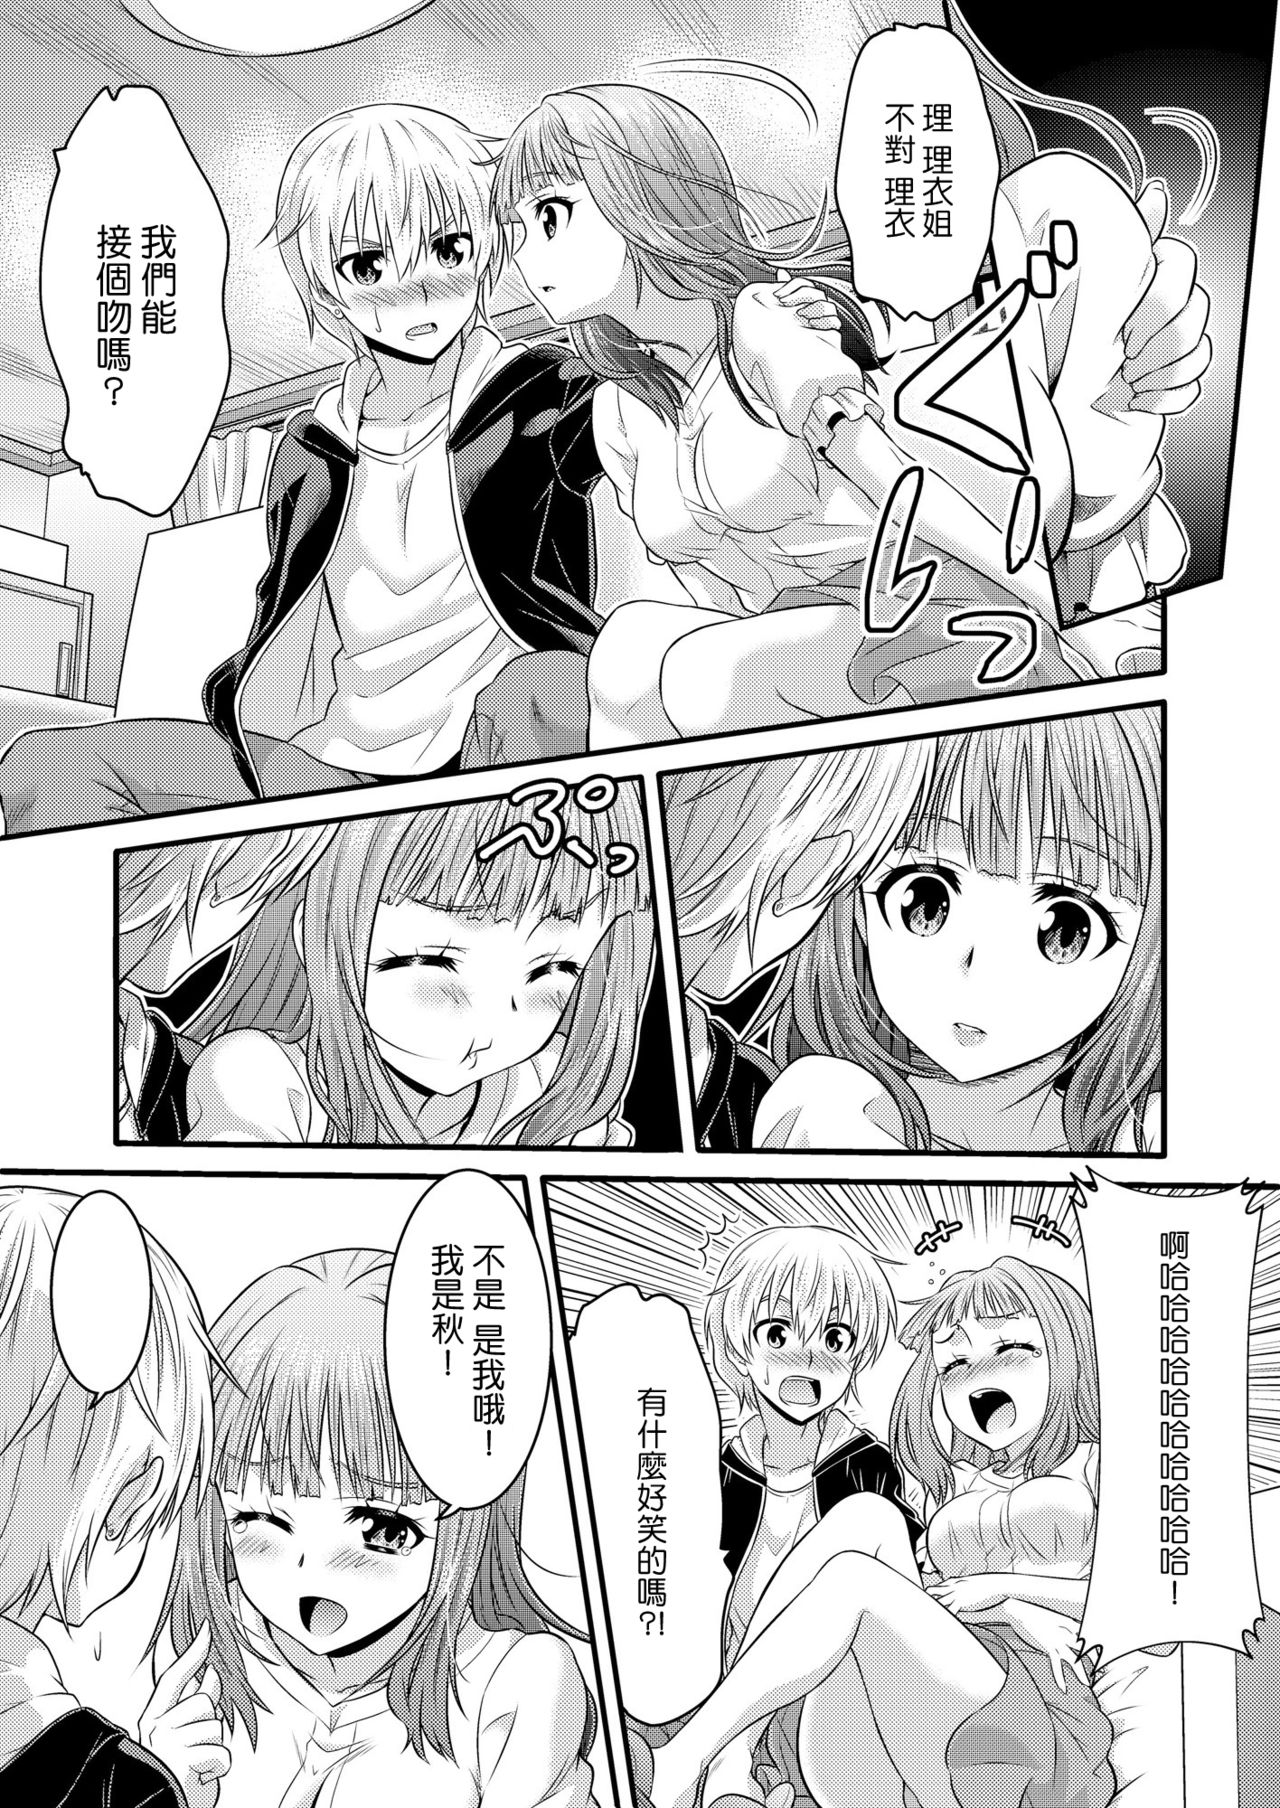 Metamorph ★ Coordination - I Become Whatever Girl I Crossdress As~ [Sister Arc, Classmate Arc] [Chinese] [瑞树汉化组] page 12 full